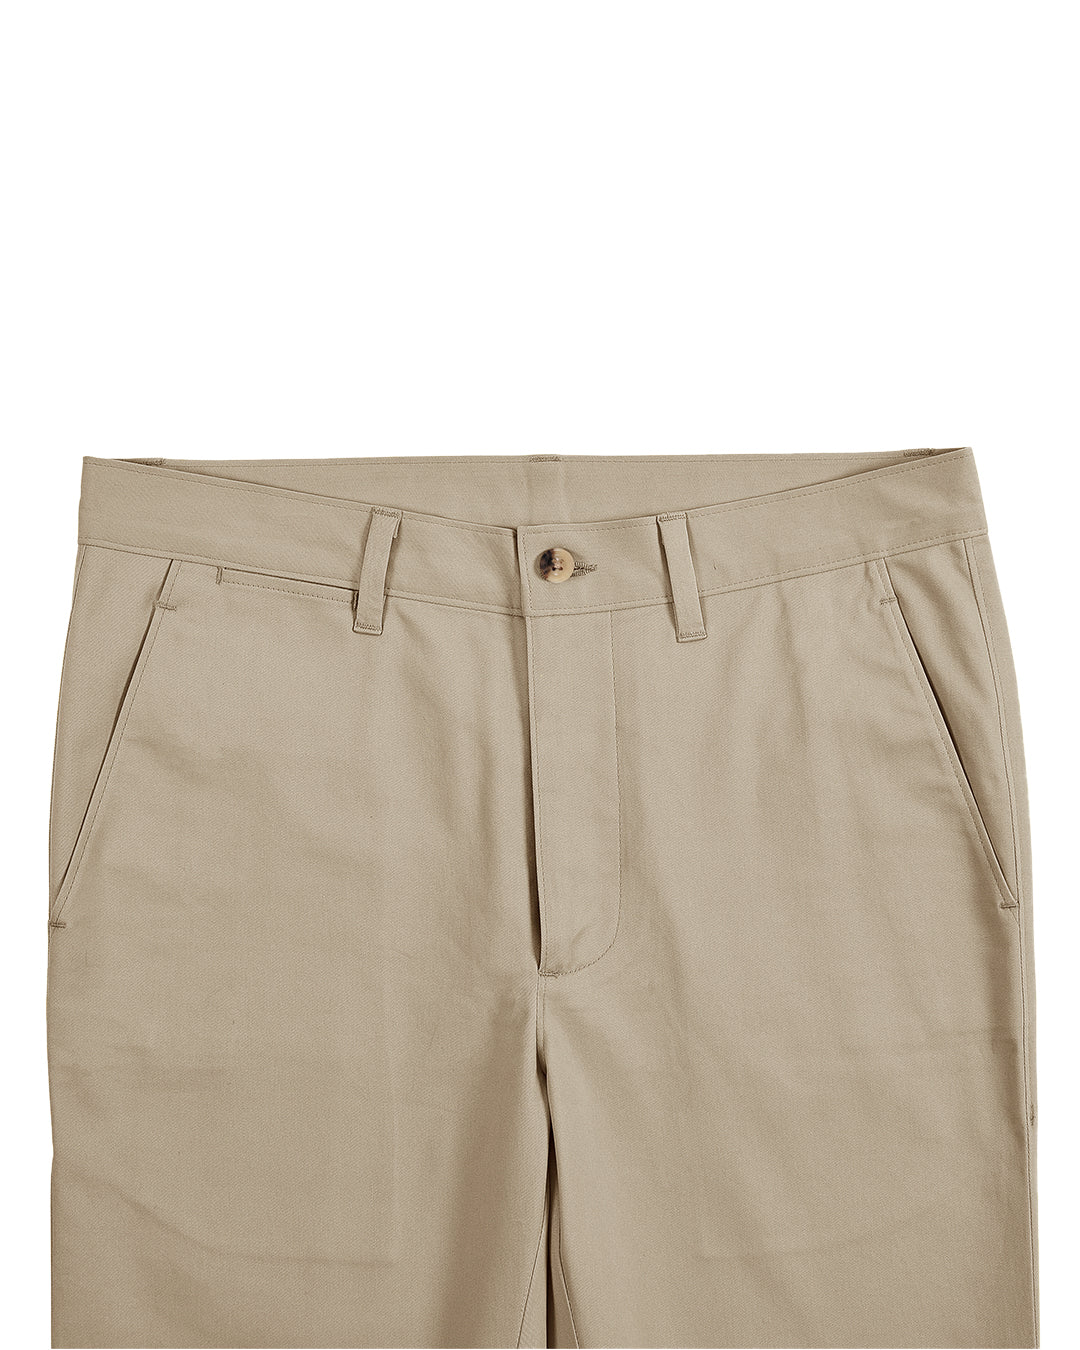 Front view of custom Genoa Chino pants for men by Luxire in British khaki